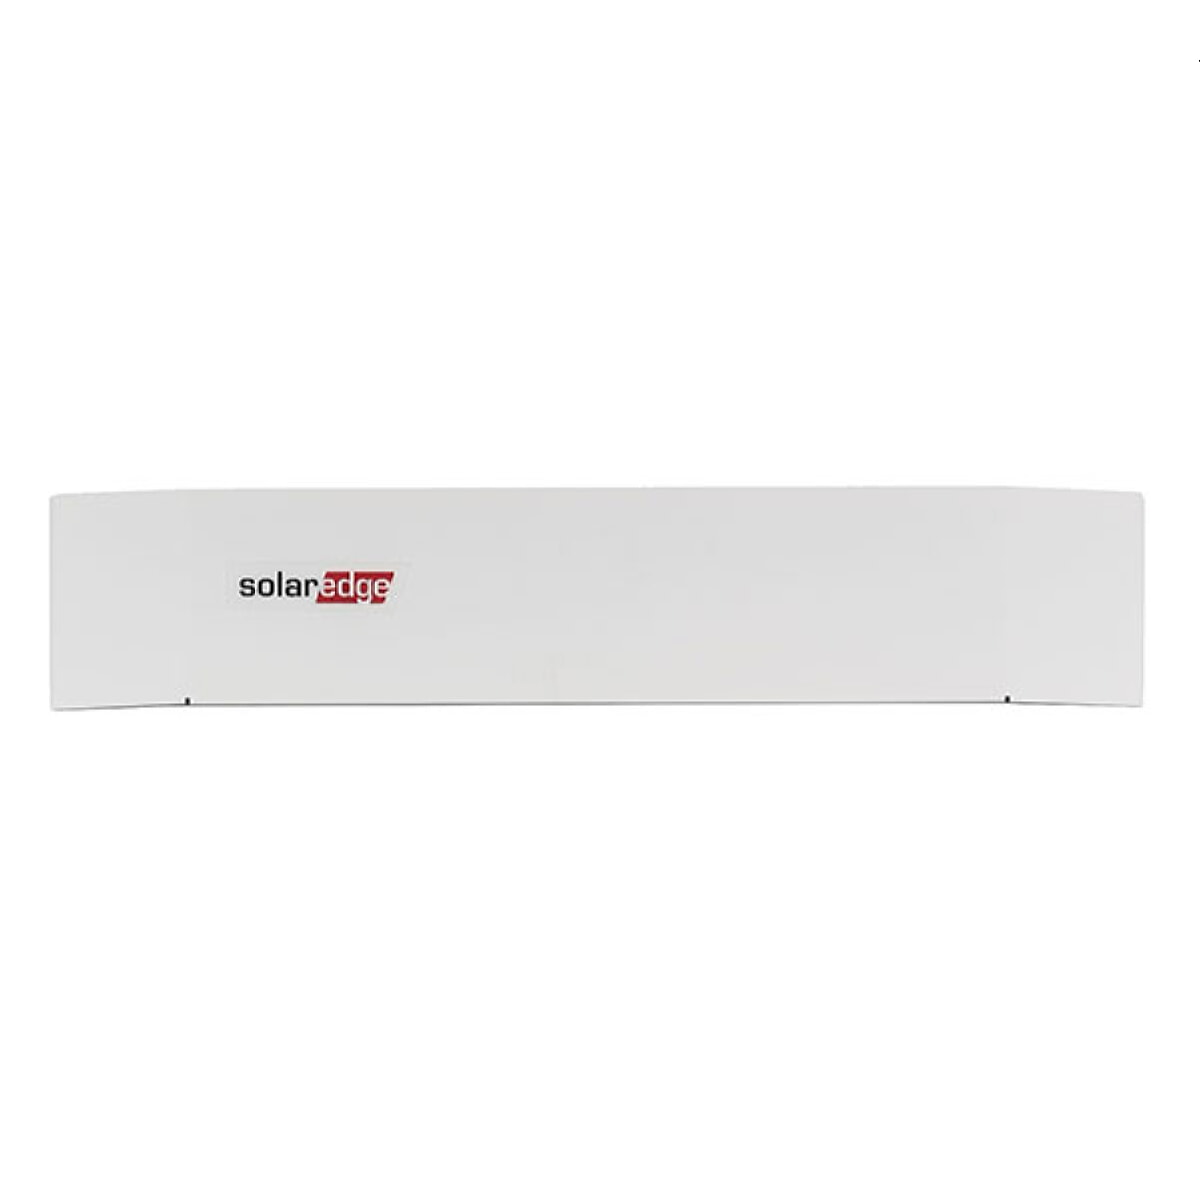 SolarEdge Top Cover Kit f. HOME BATTERY